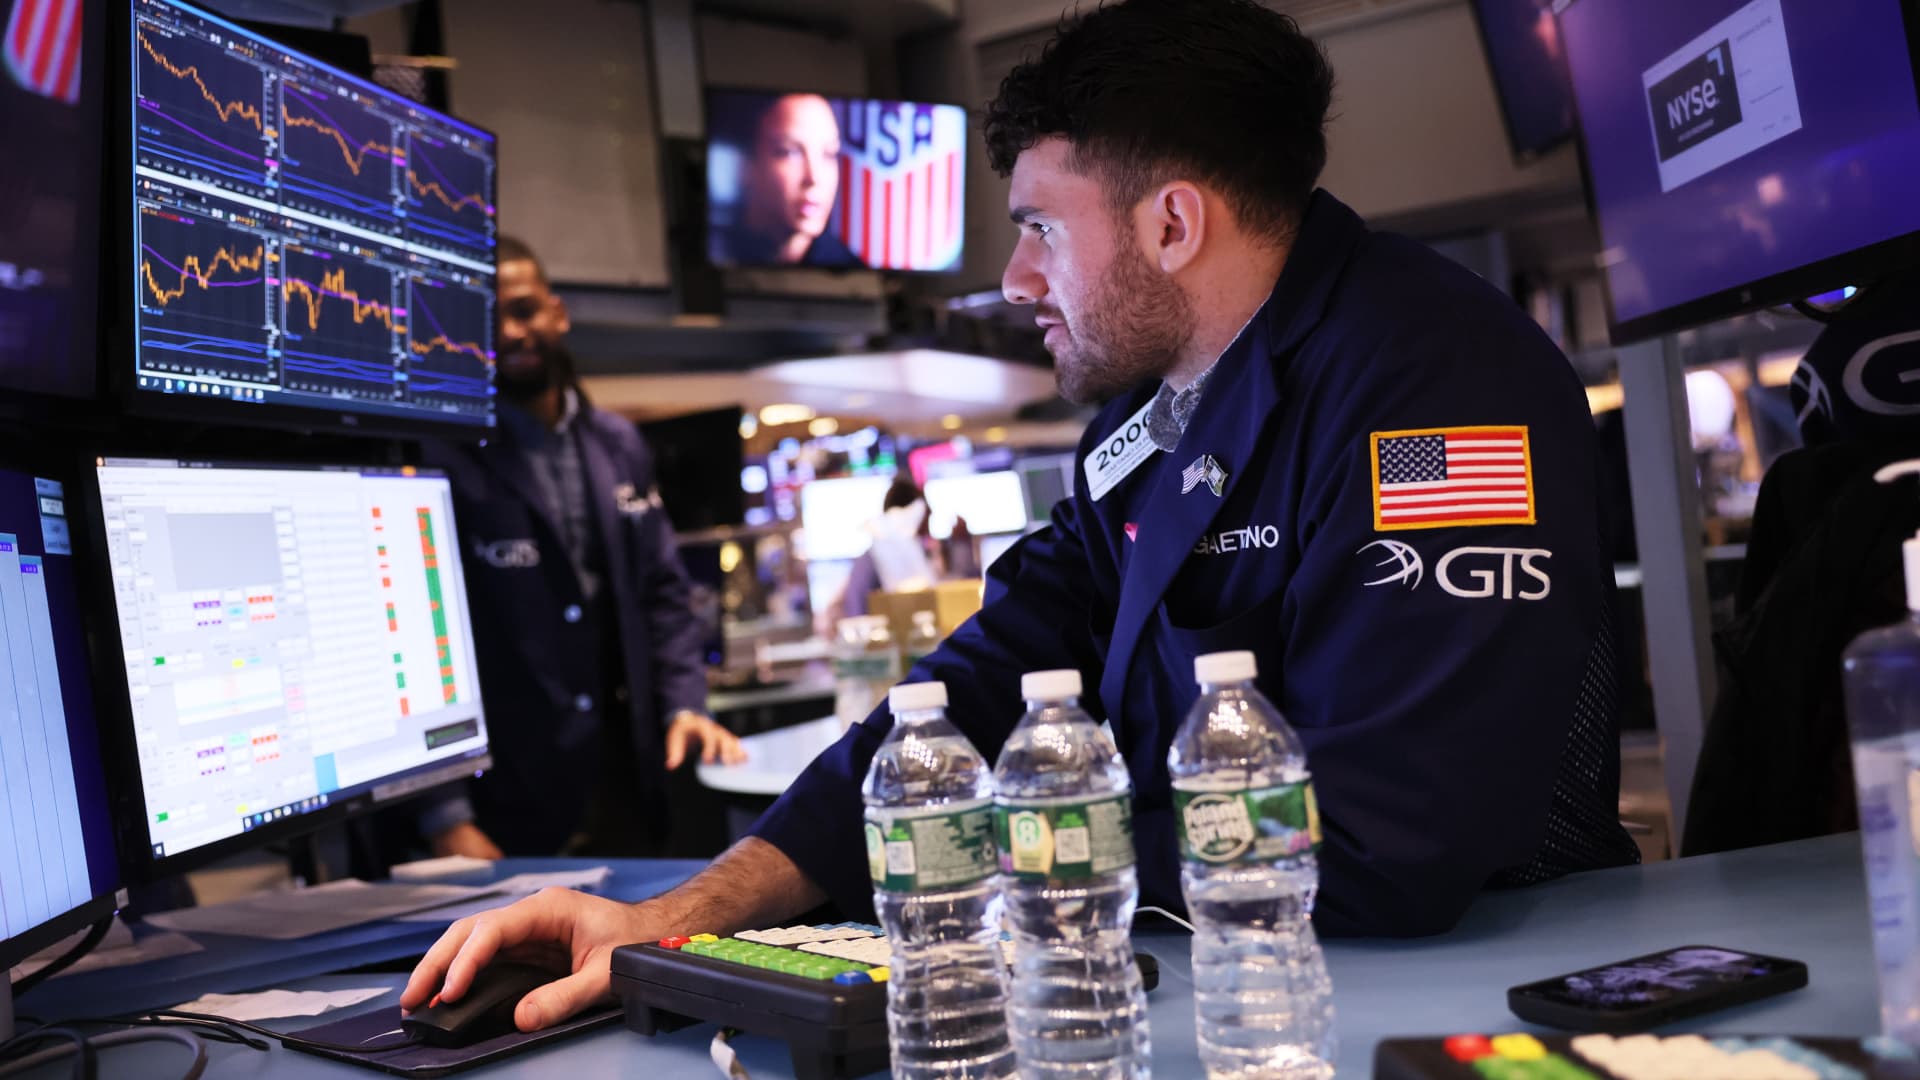 Traders work on the floor of the New York Stock Exchange during morning trading on February 22, 2023 in New York City.